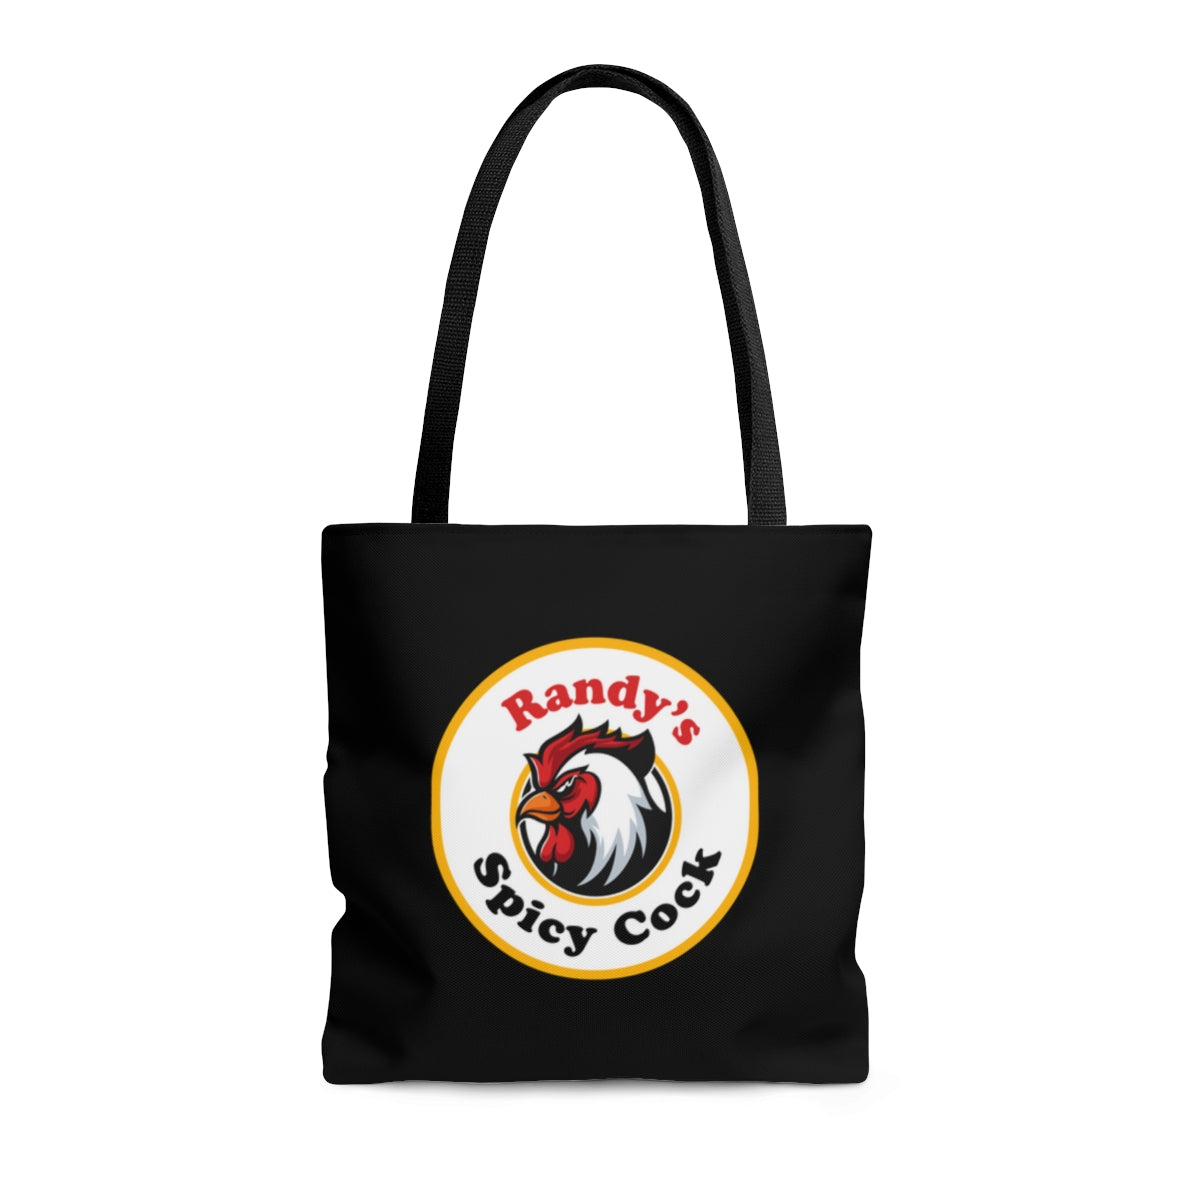 Randy's Spicy Cock Tote Bag